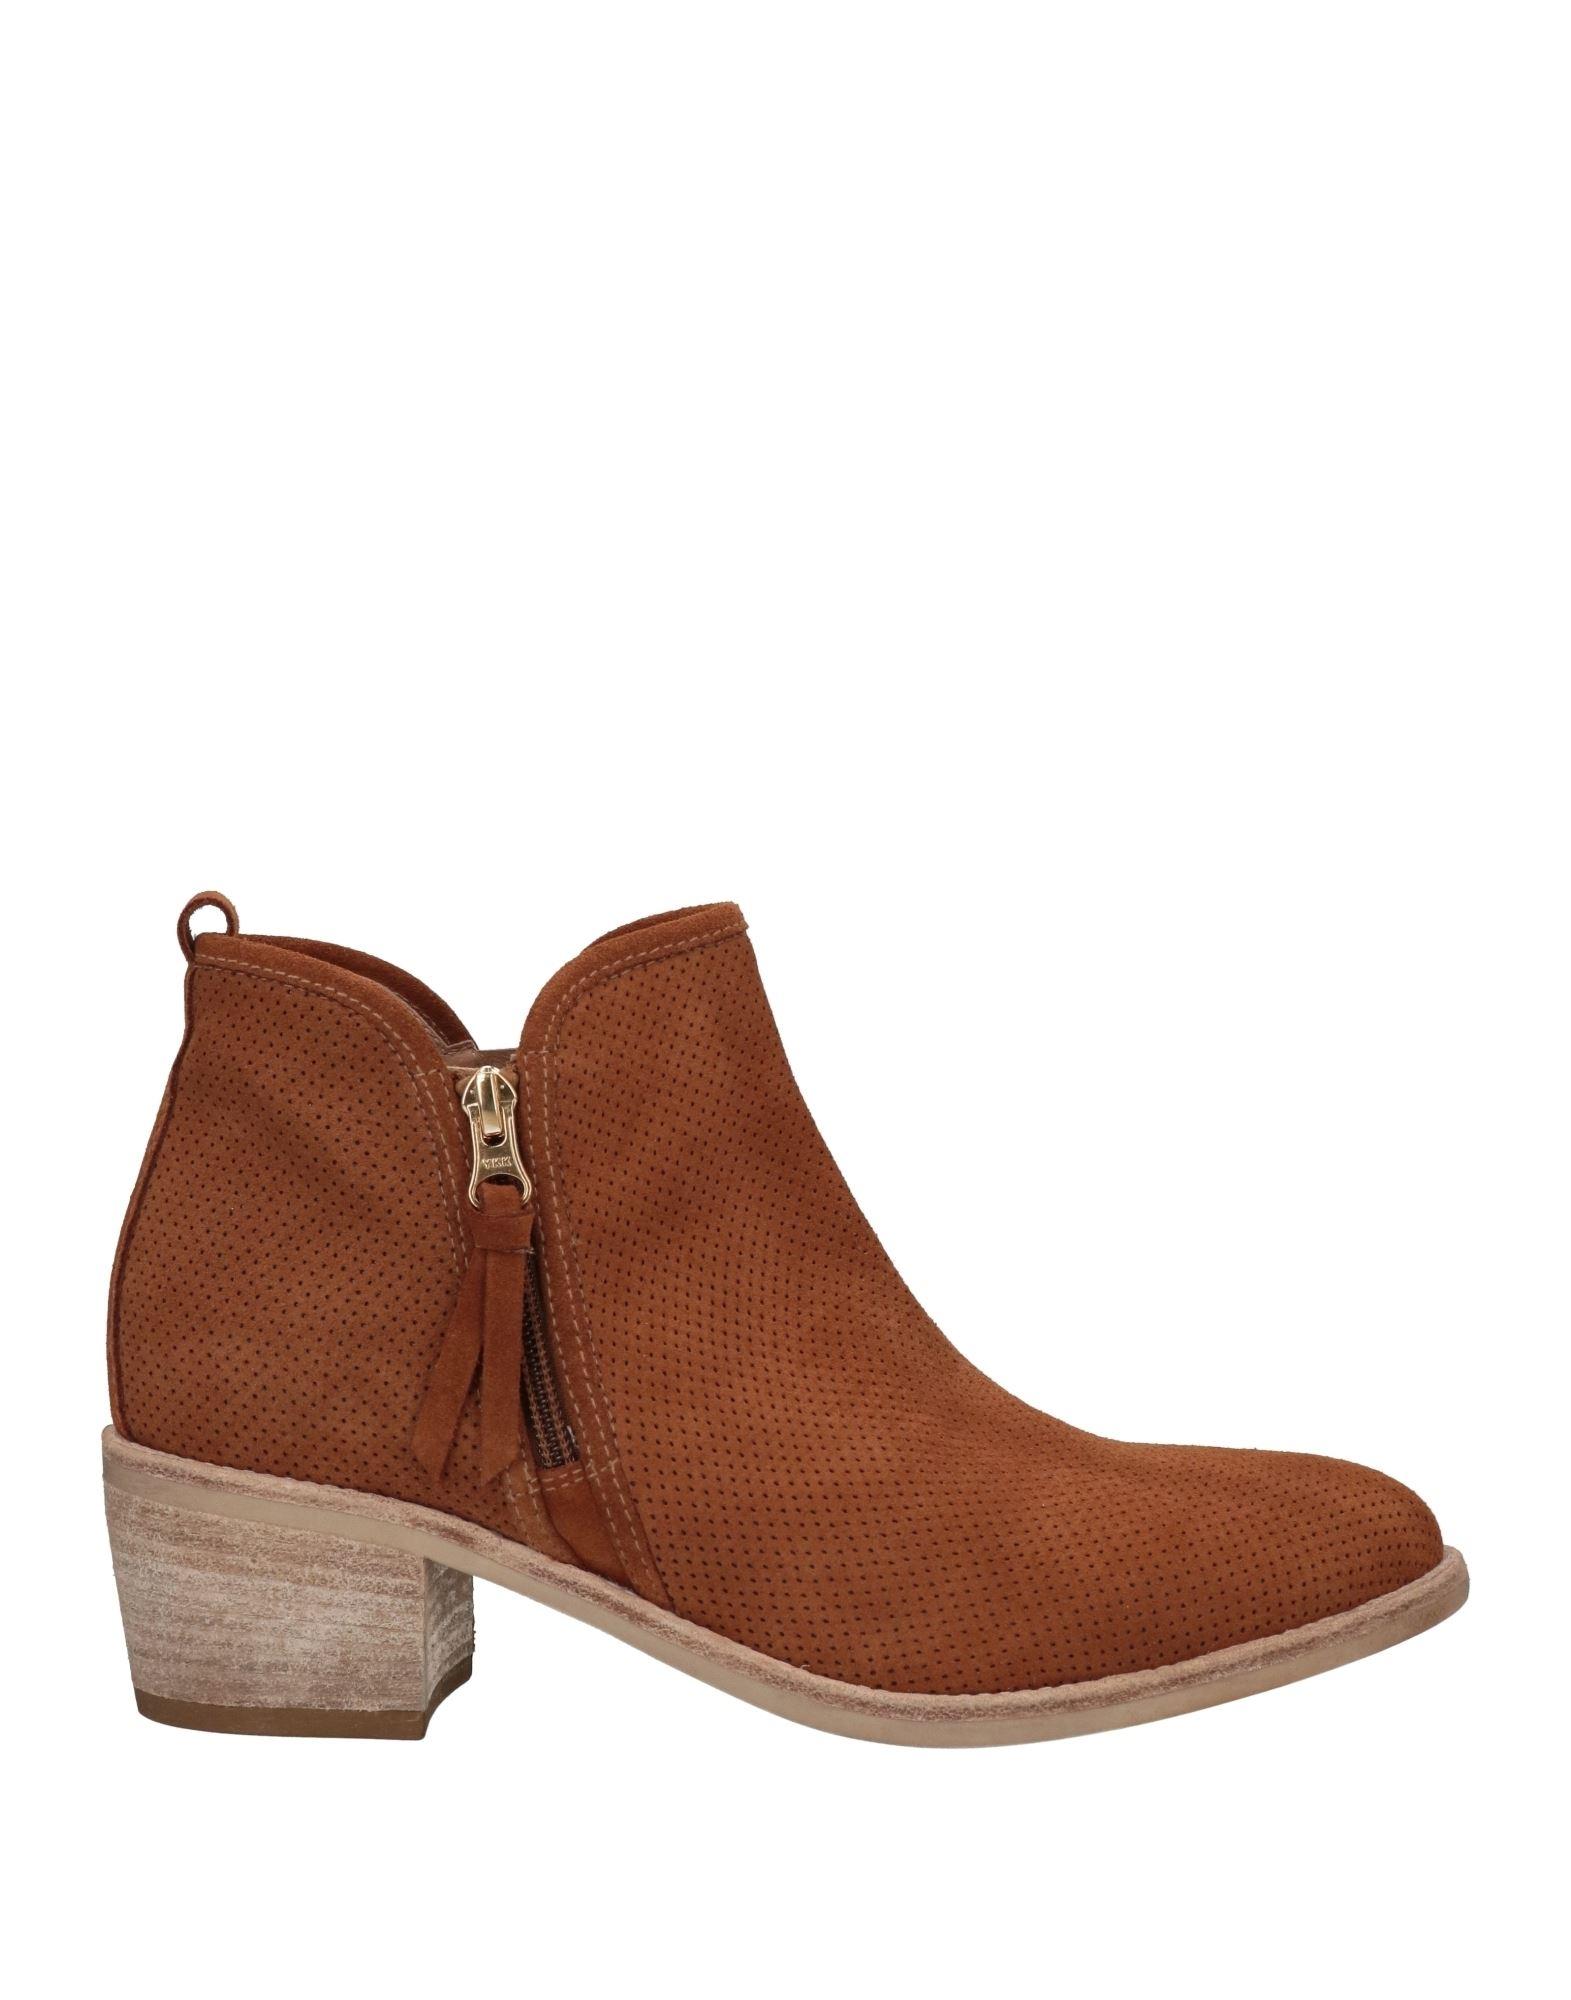 Nero Giardini Ankle Boots in Brown | Lyst